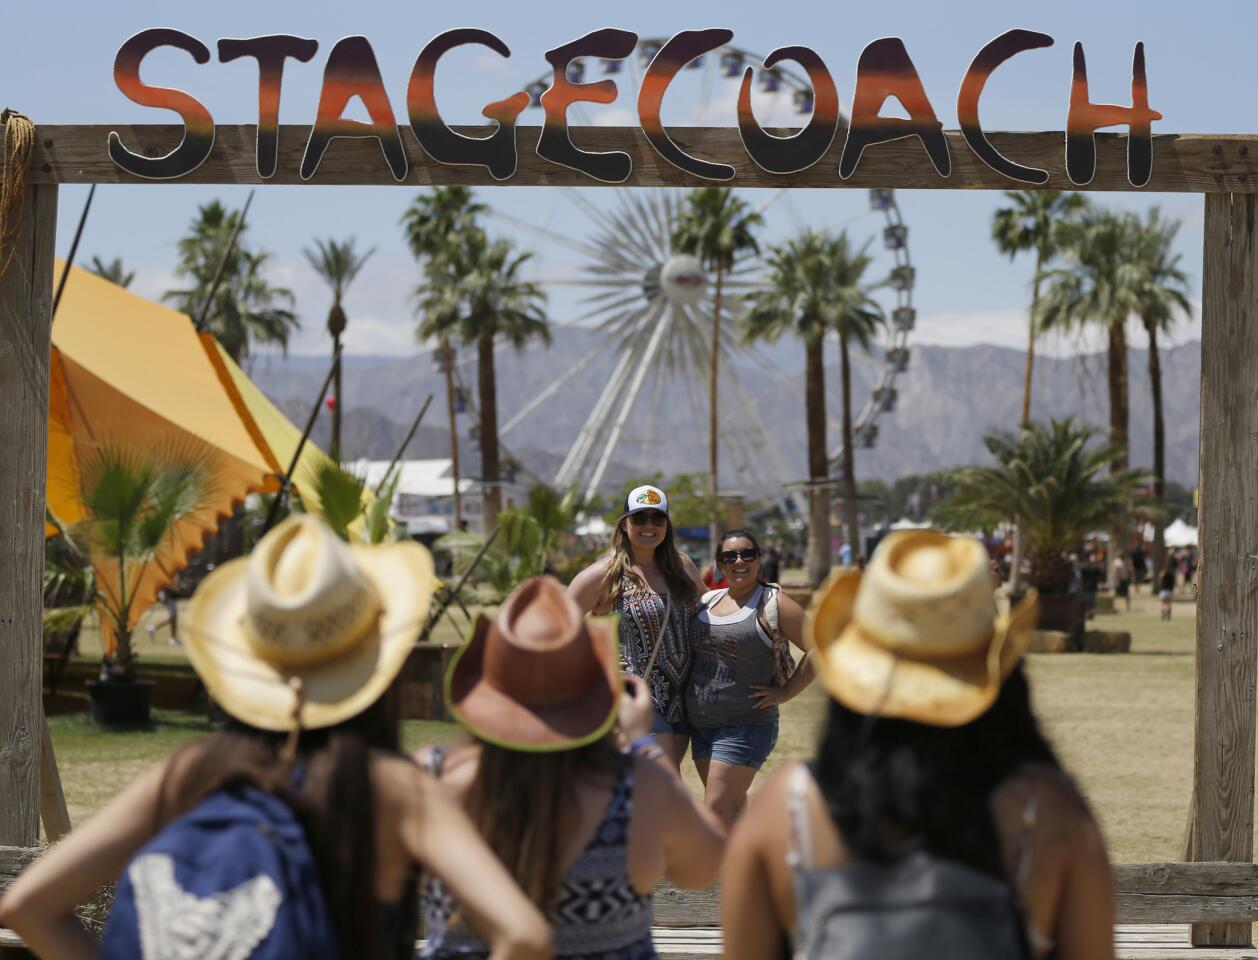 Stagecoach Country Music Festival